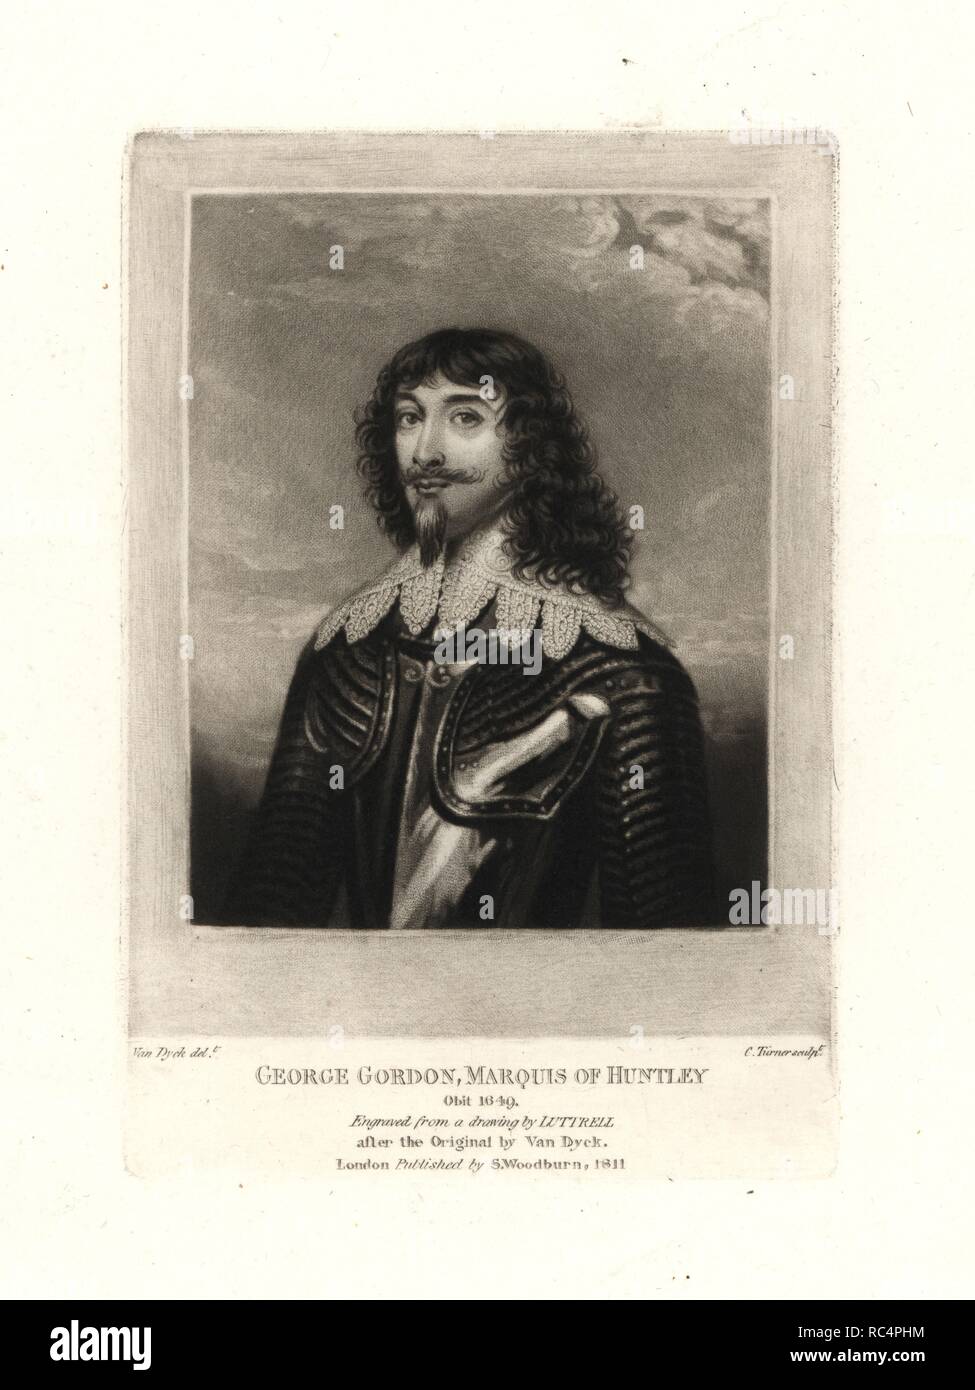 George Gordon, 2nd Marquess of Huntly, died 1649. Copperplate mezzotint by Charles Turner after an original painting by Anthony van Dyck from Samuel Woodburn's Portraits of Characters Illustrious in British History, London, 1811. Stock Photo